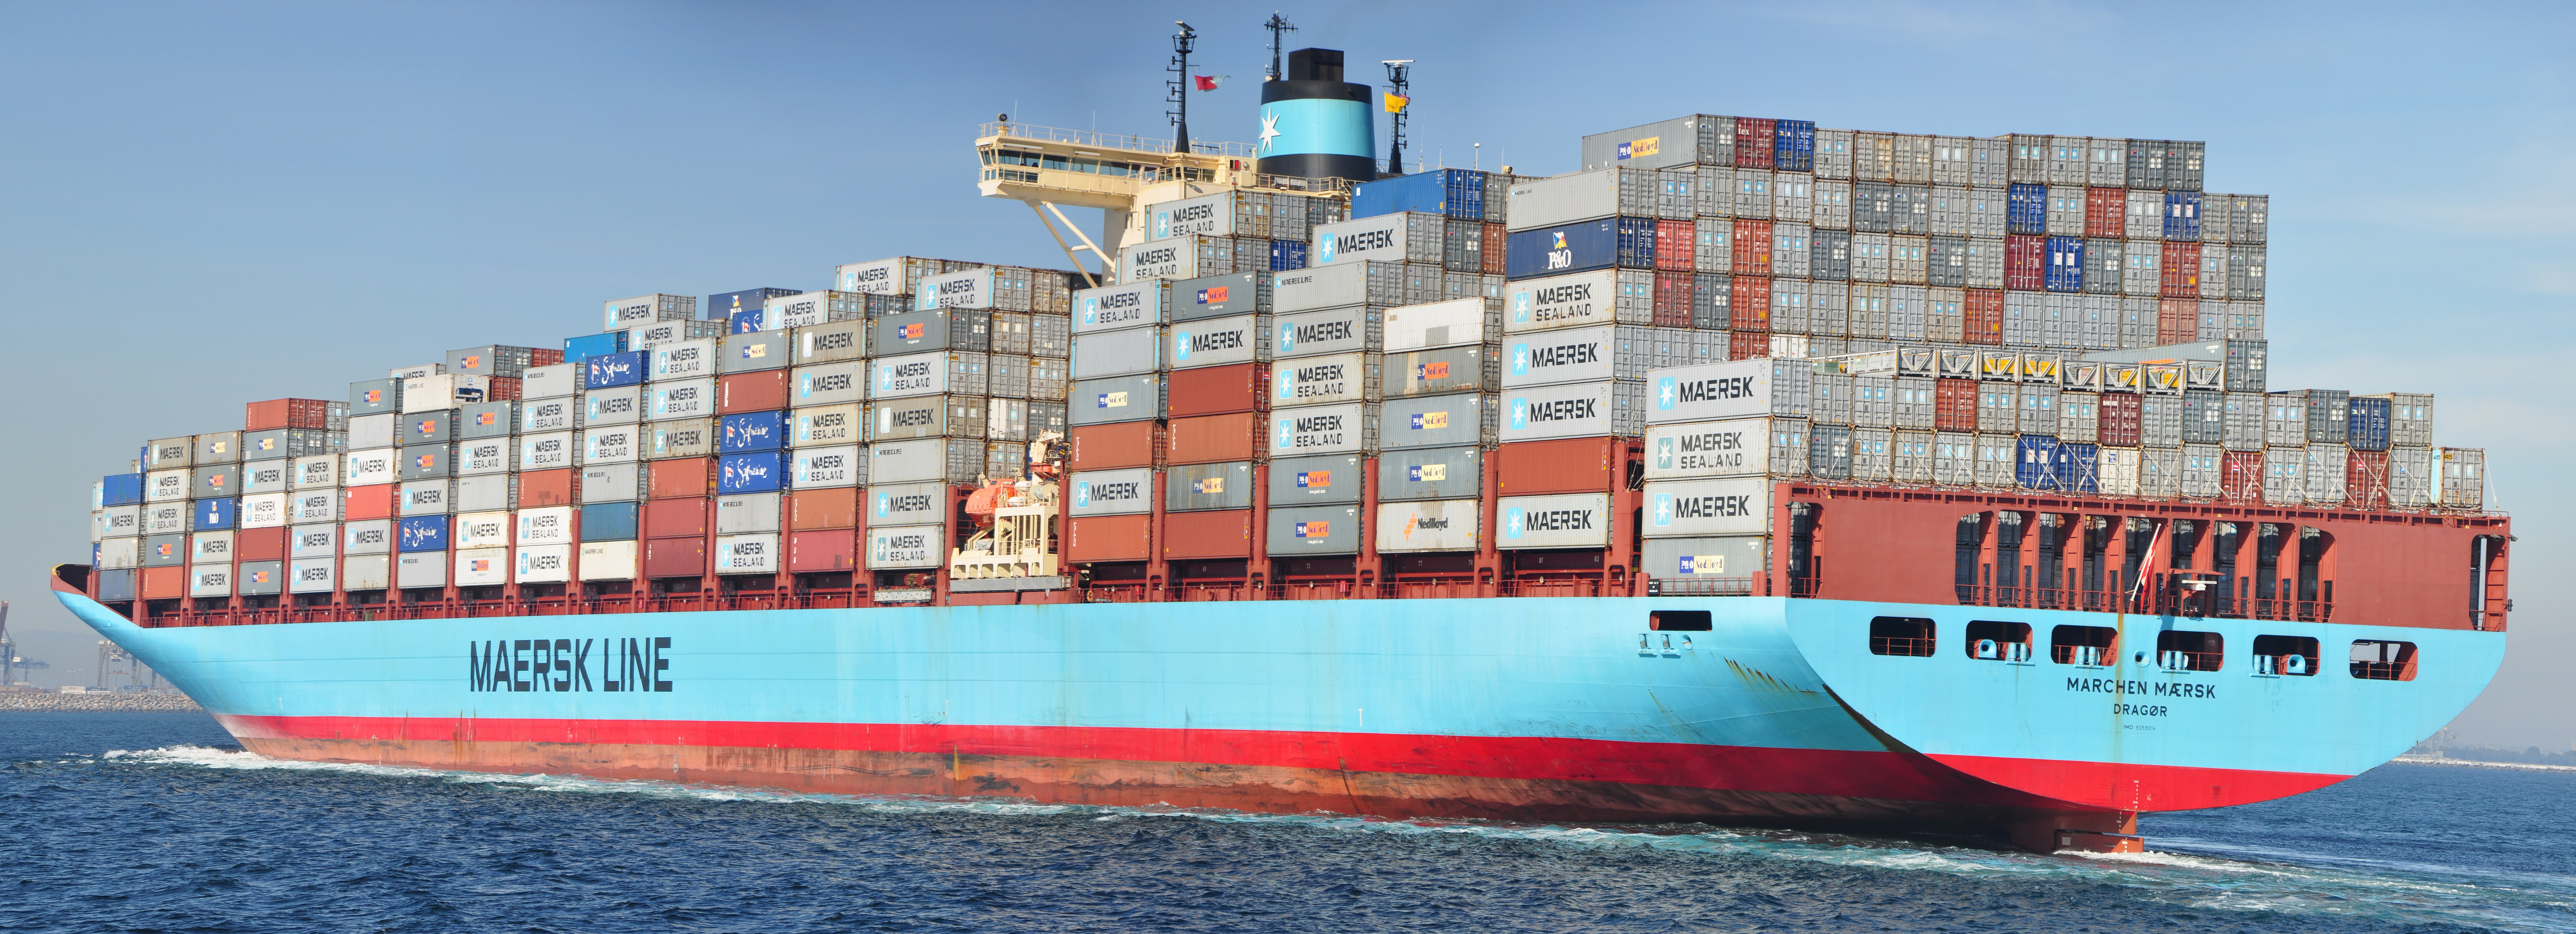 Maersk Maersk Line Cargo Container Ship Dual Monitors 9647x3499